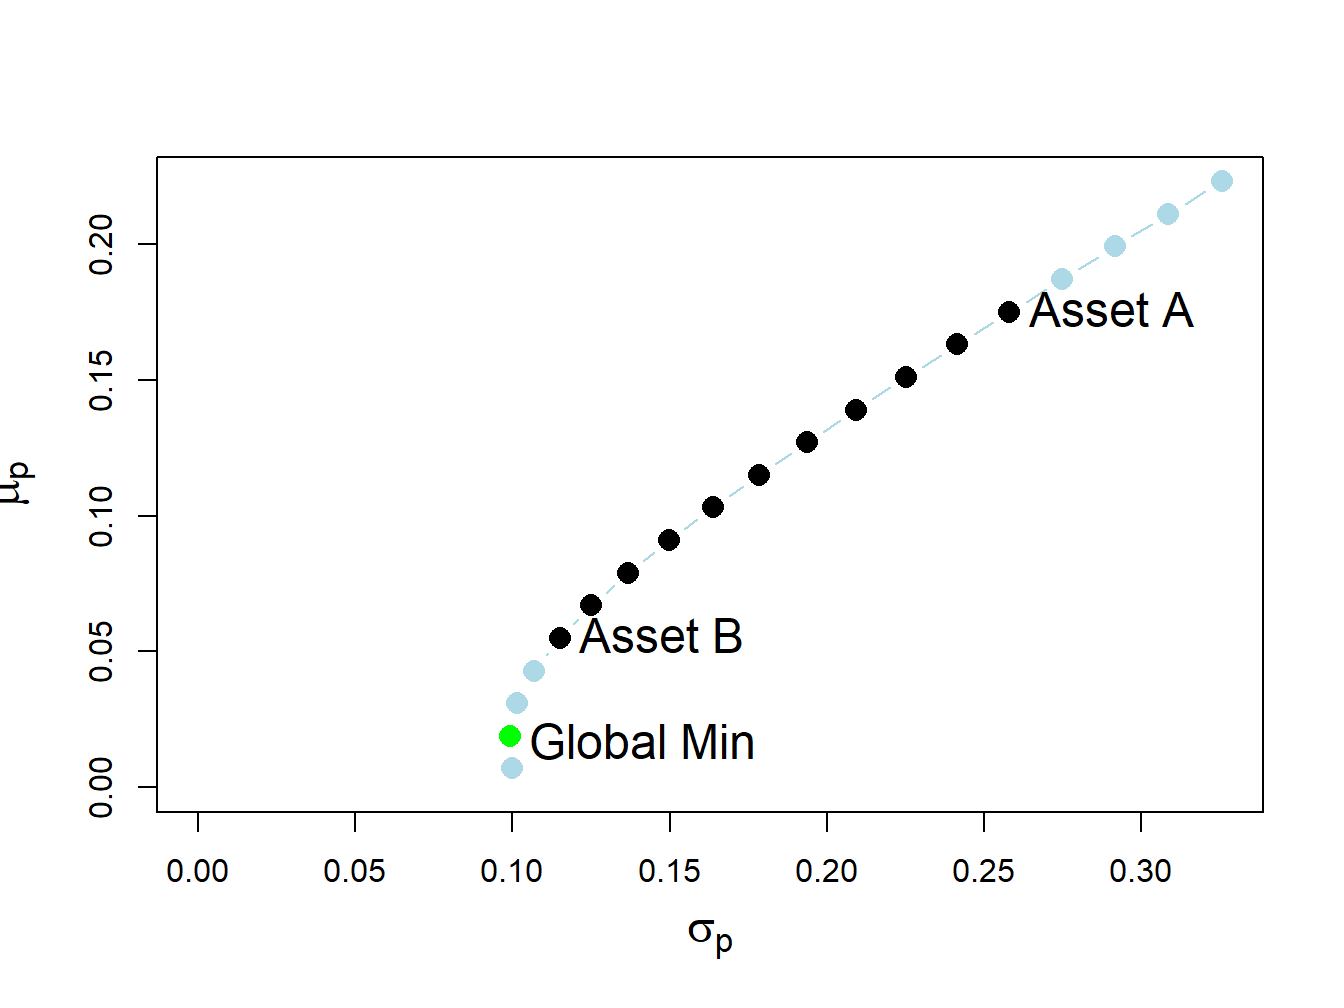 Two risky asset portfolio frontier with short sale in Asset A in the global minimum variance portfolio.